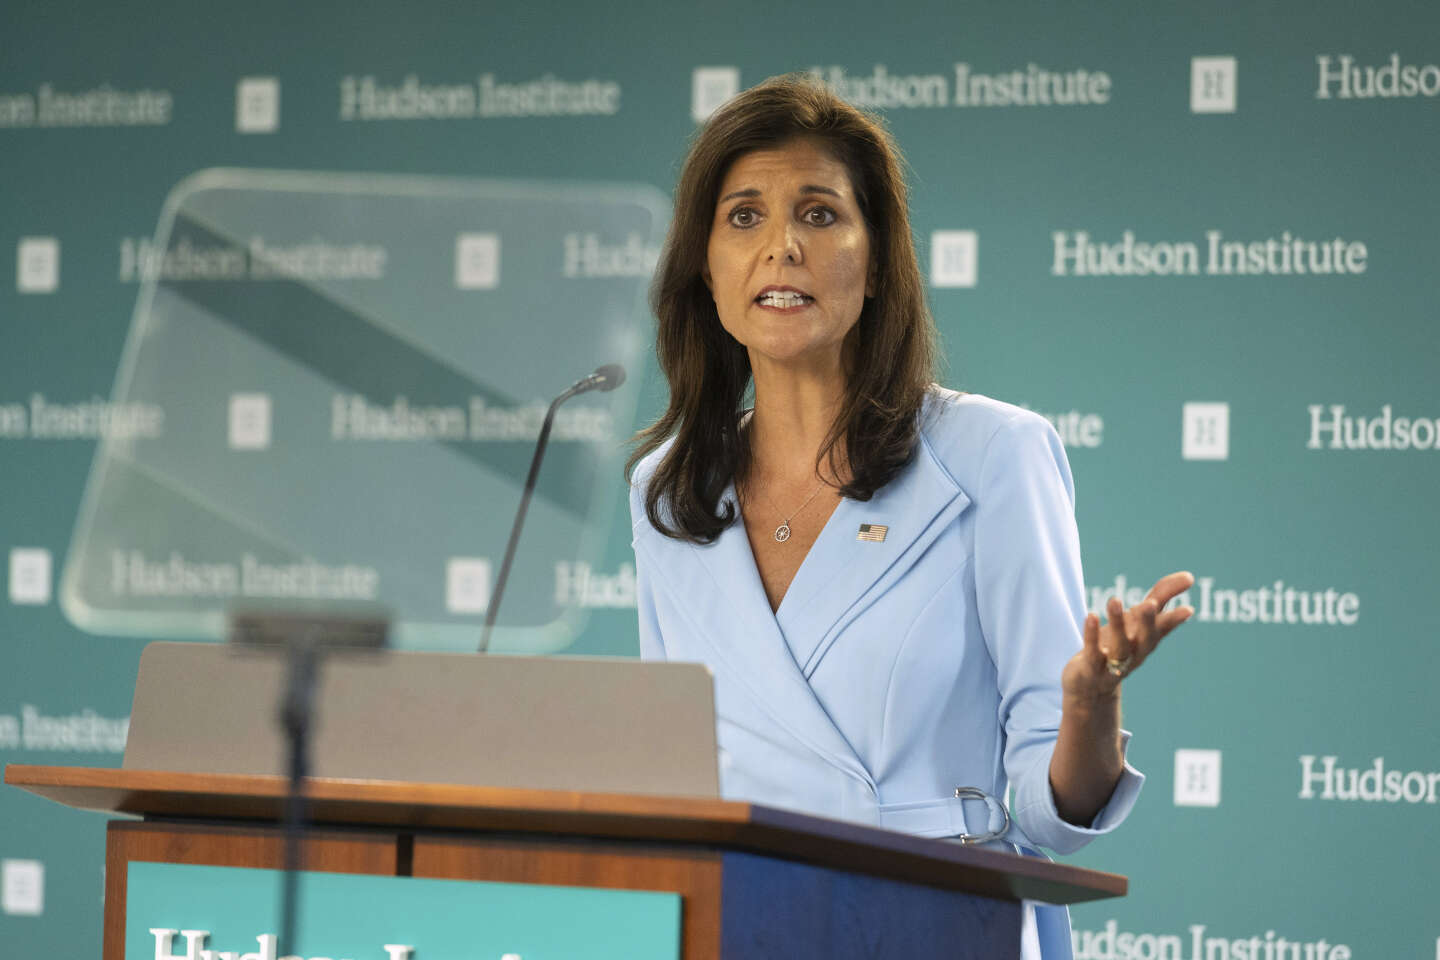 Nikki Haley has announced that she will vote for Donald Trump